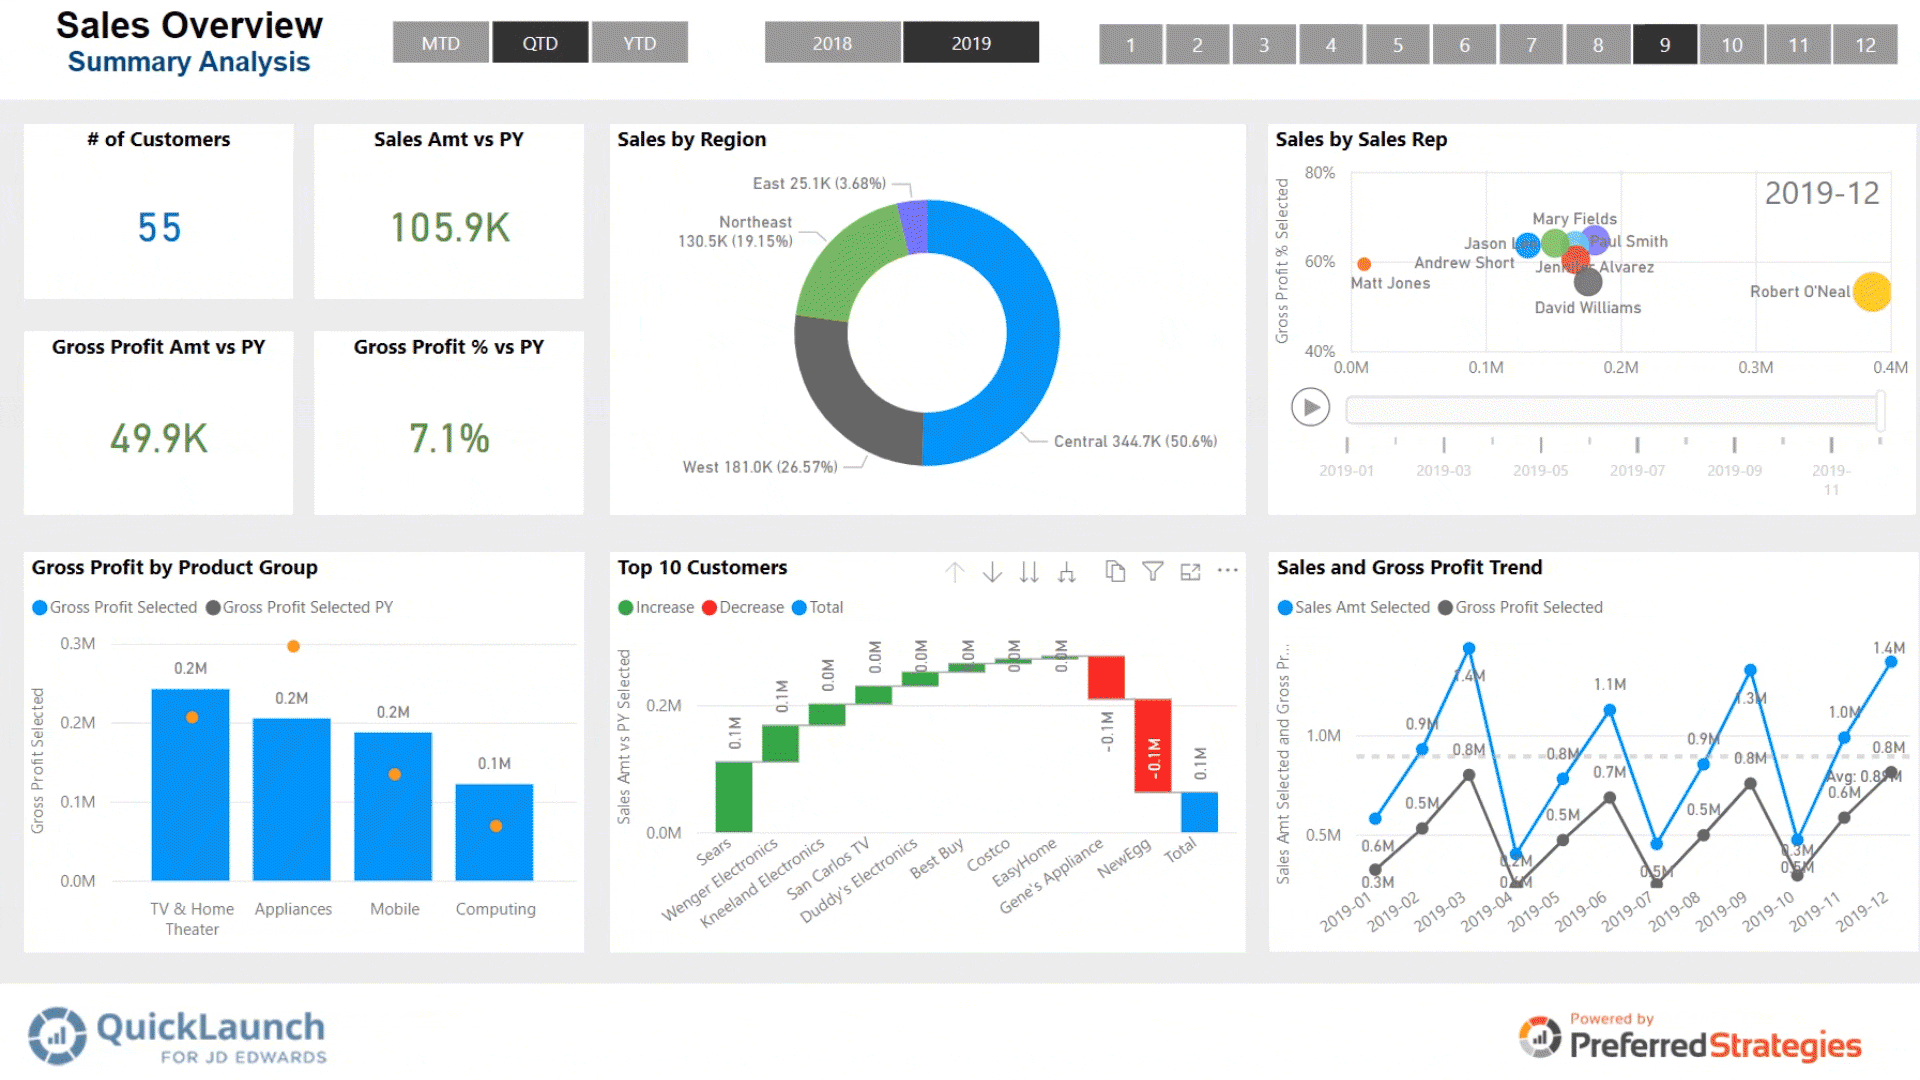 Quicklaunch For Jd Edwards And Power Bi